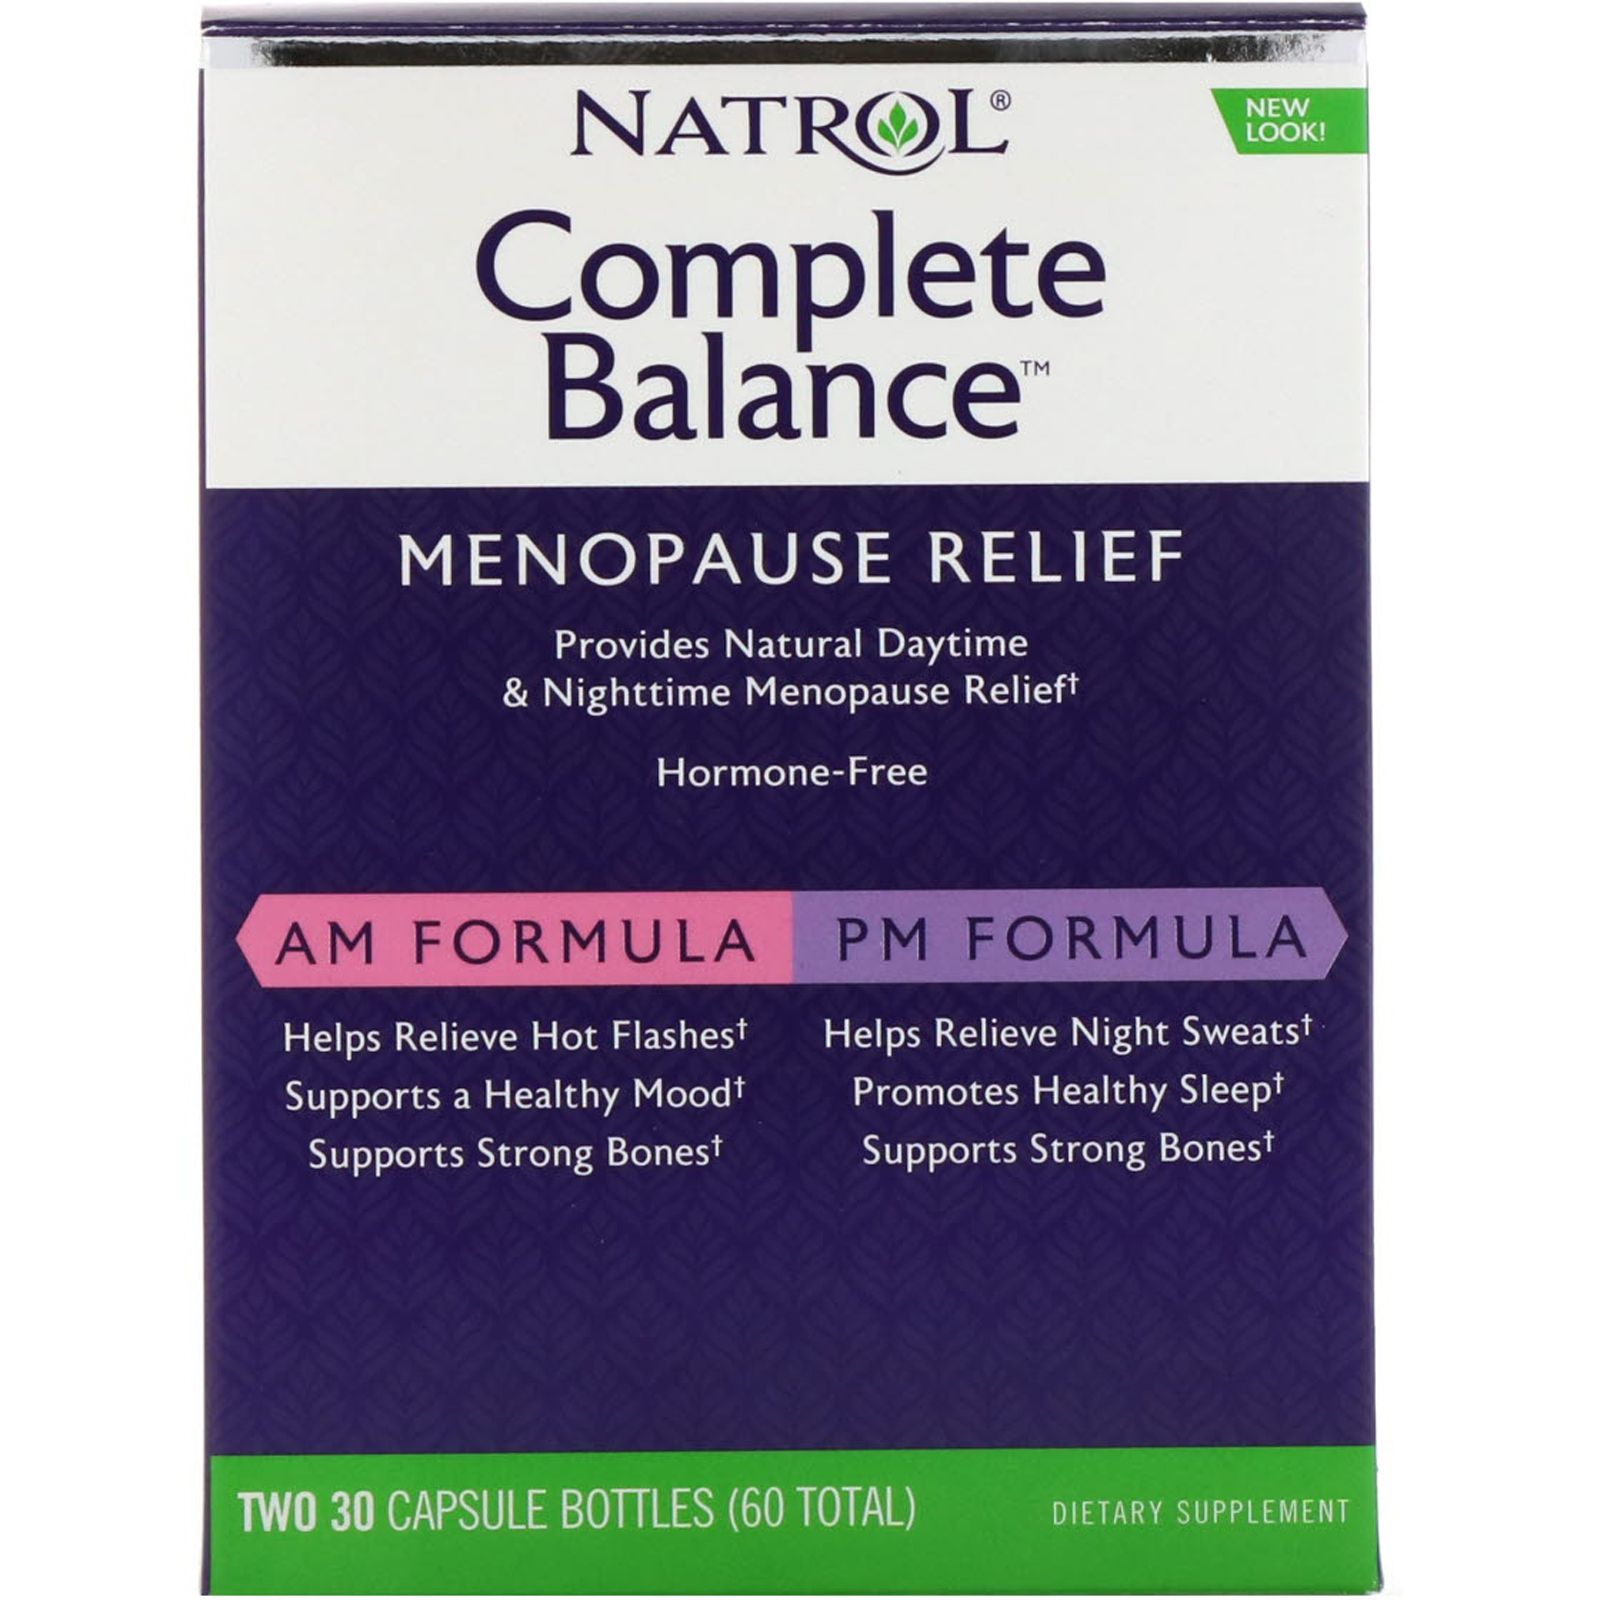 Natrol Complete Balance Menopause Relief AM/PM Two Bottles 30 Capsules Each пищевая добавка natrol complete balance menopause am